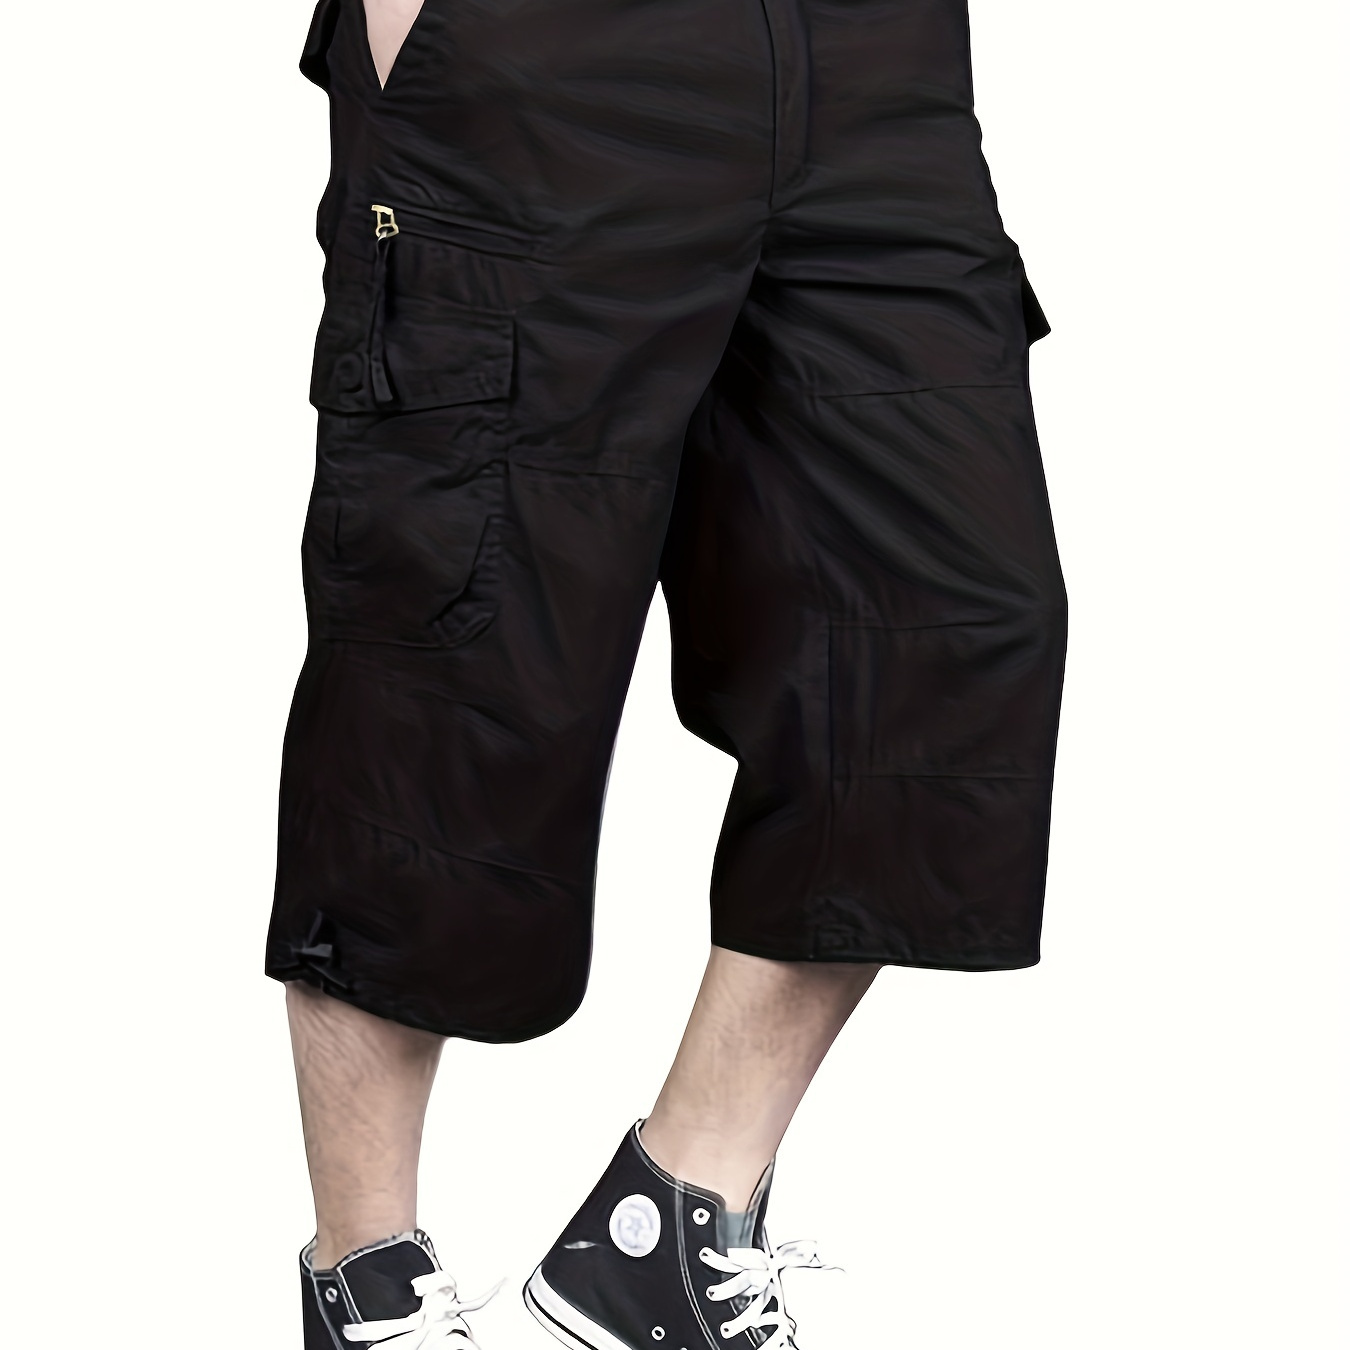 Men's Solid Loose Fit Capri Cargo Pants With Multiple Flap Pockets, Versatile And Chic Pants For Summer Leisurewear